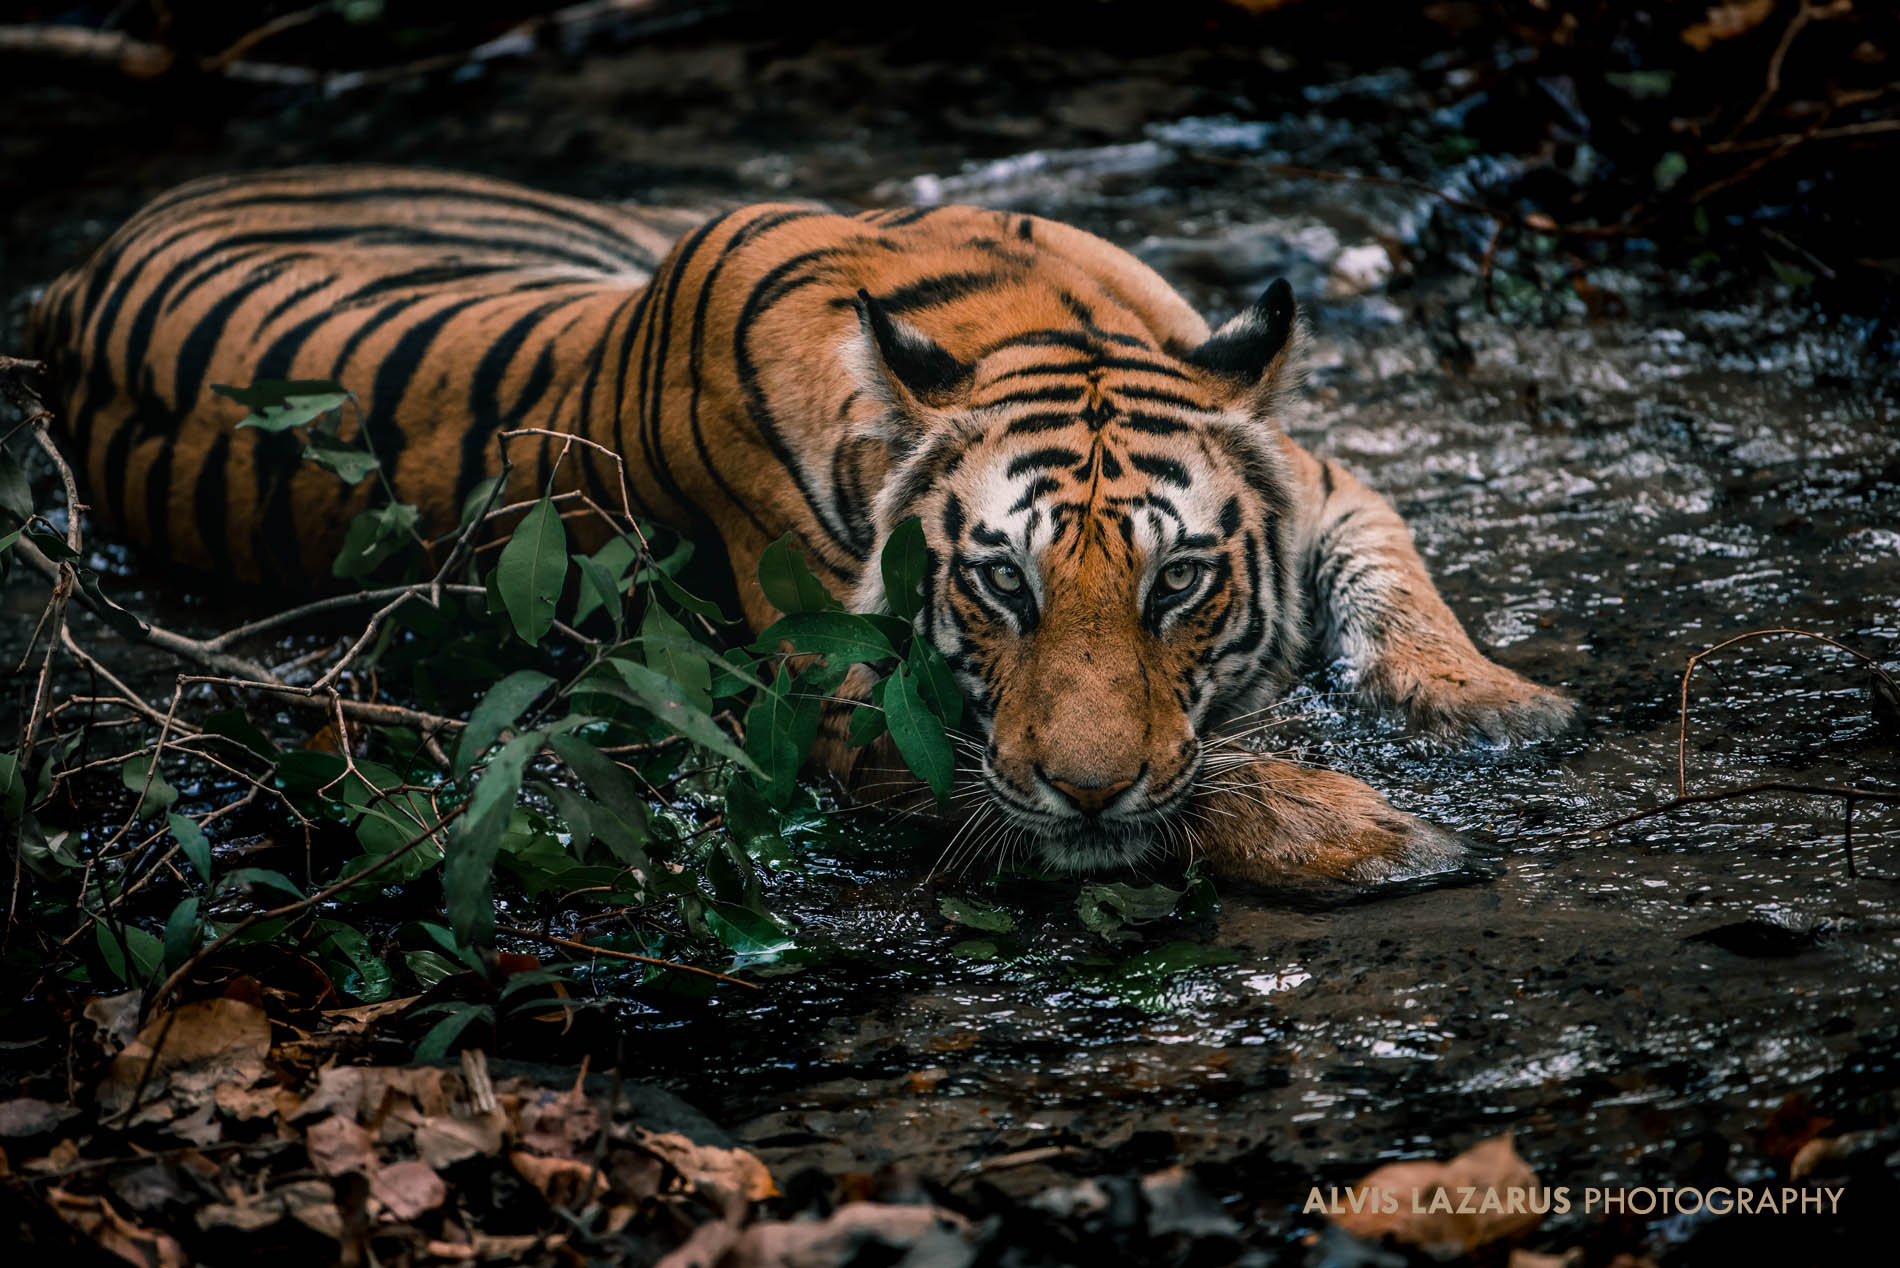 "Tiger by the river photographed looking into camera"